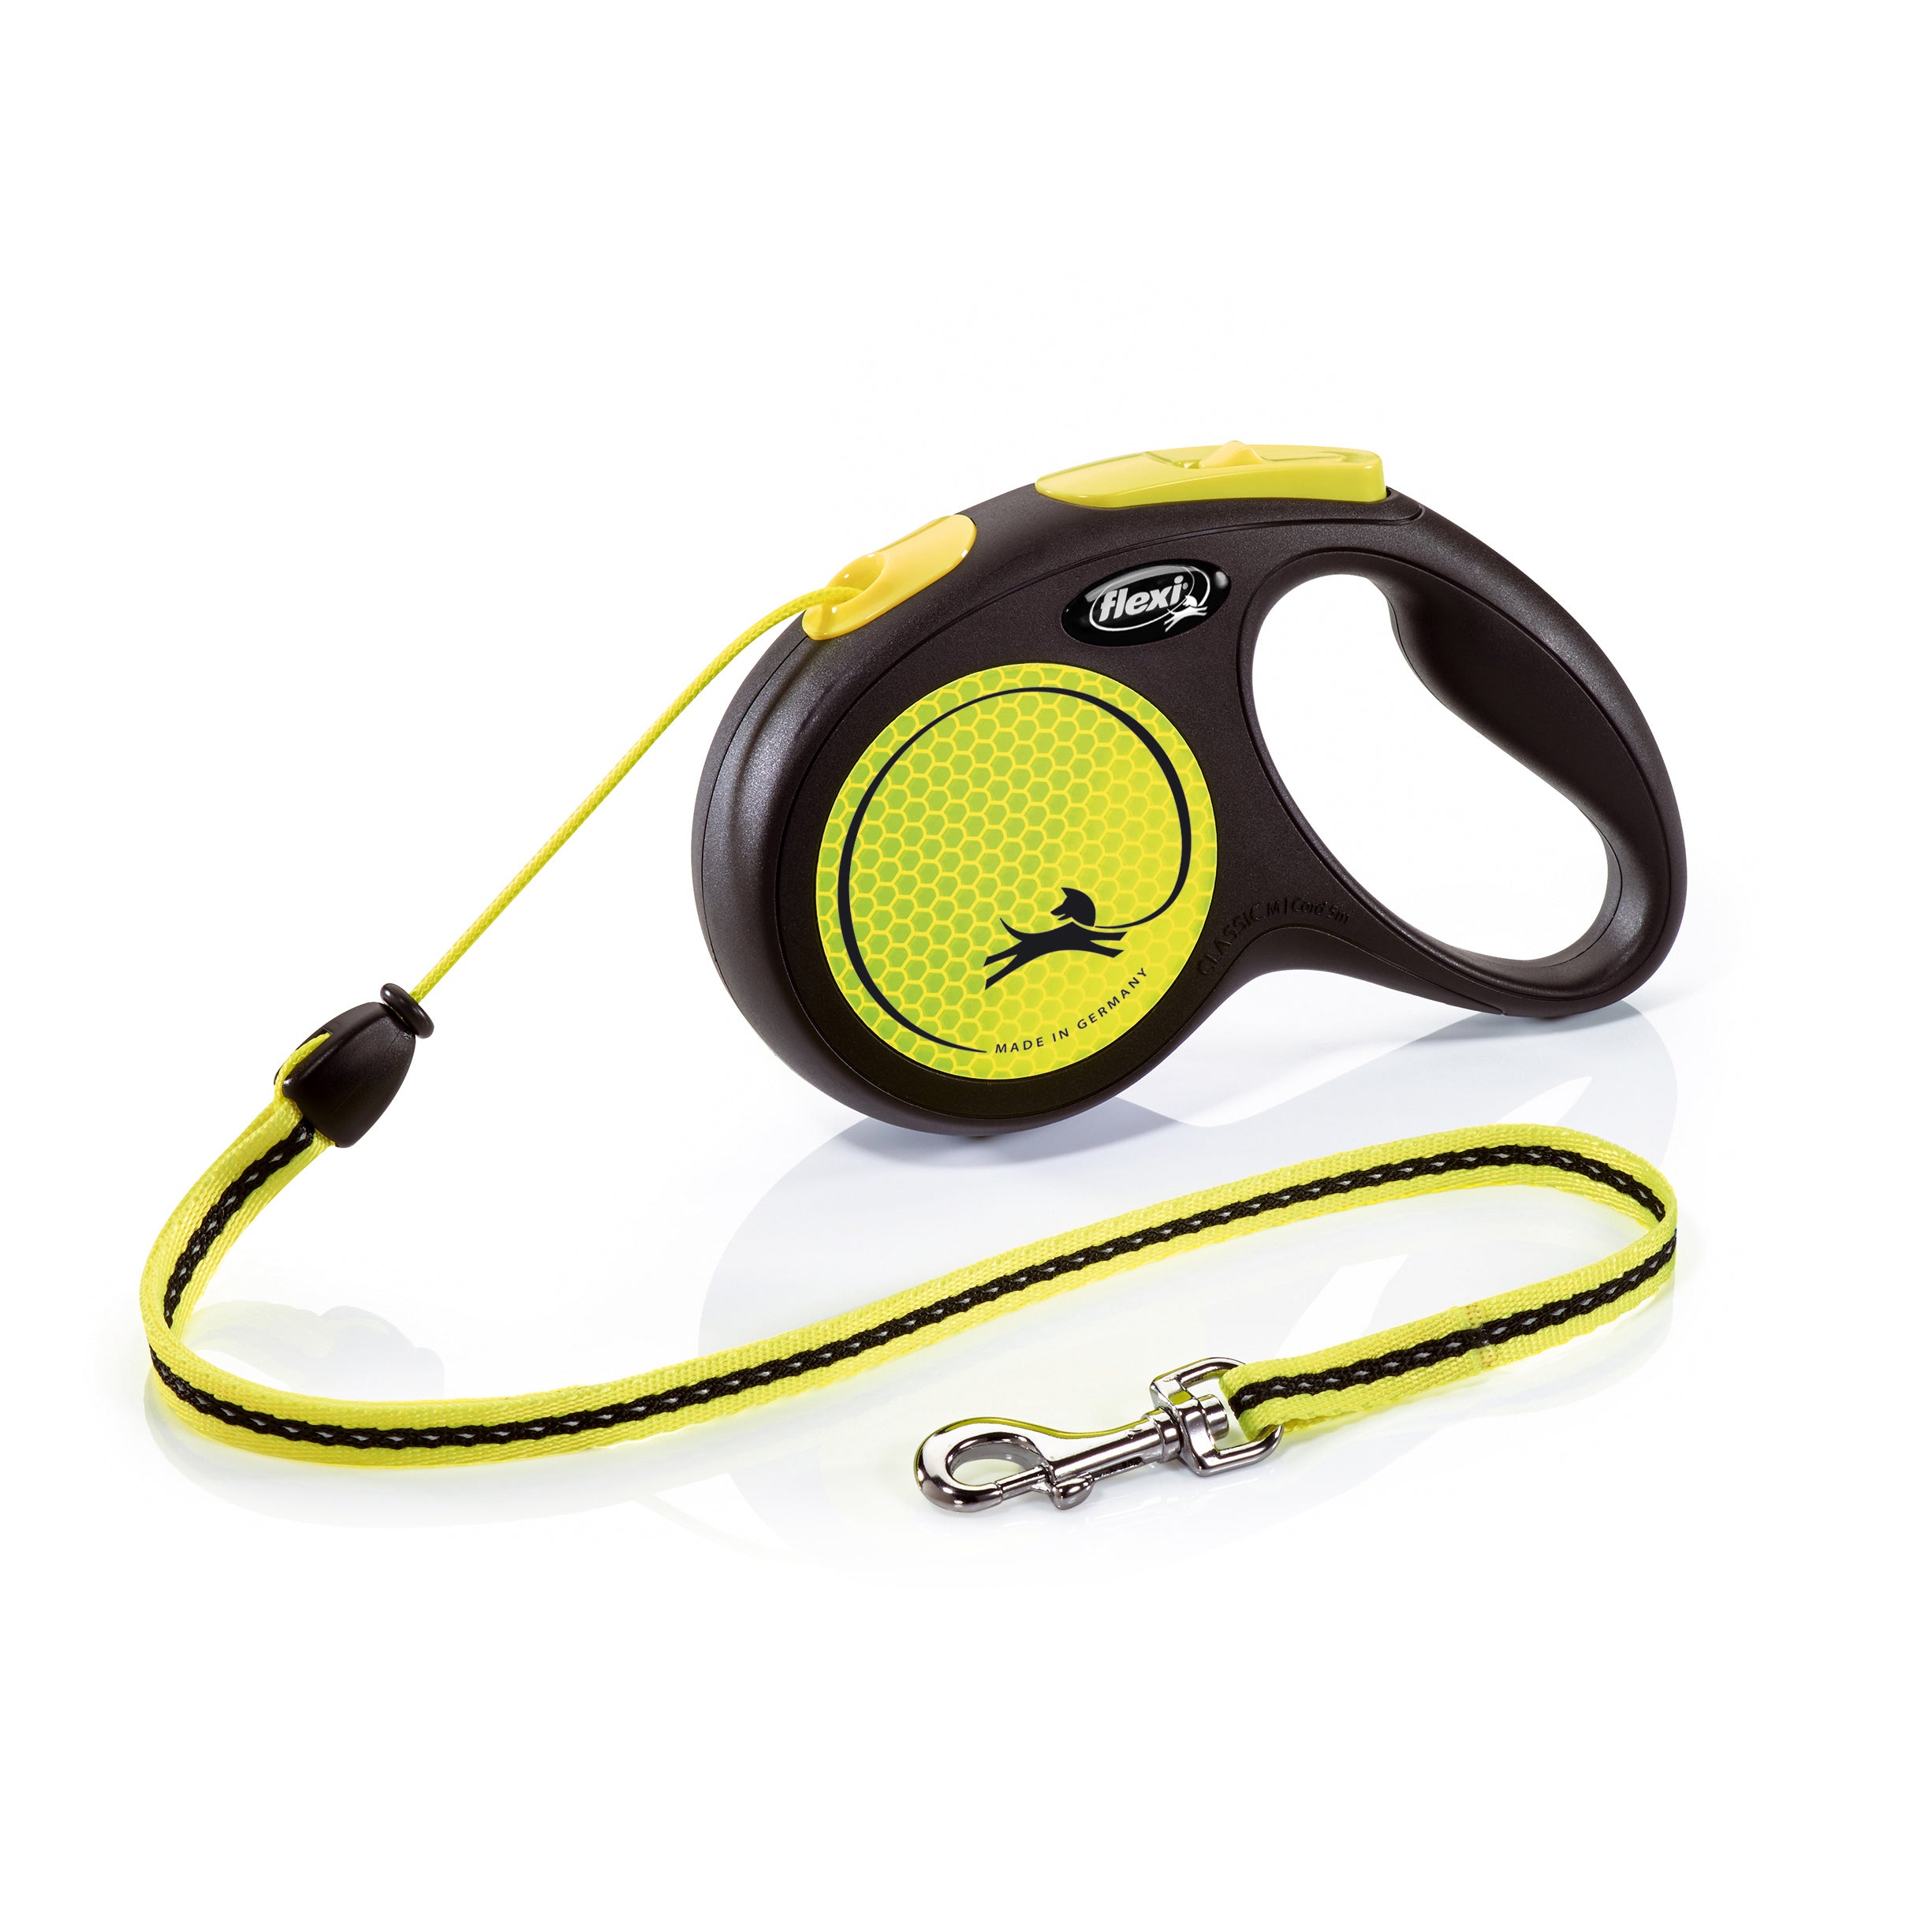 Image of Flexi Neon Retractable Dog Lead - Black/Yellow - Giant Large Tape